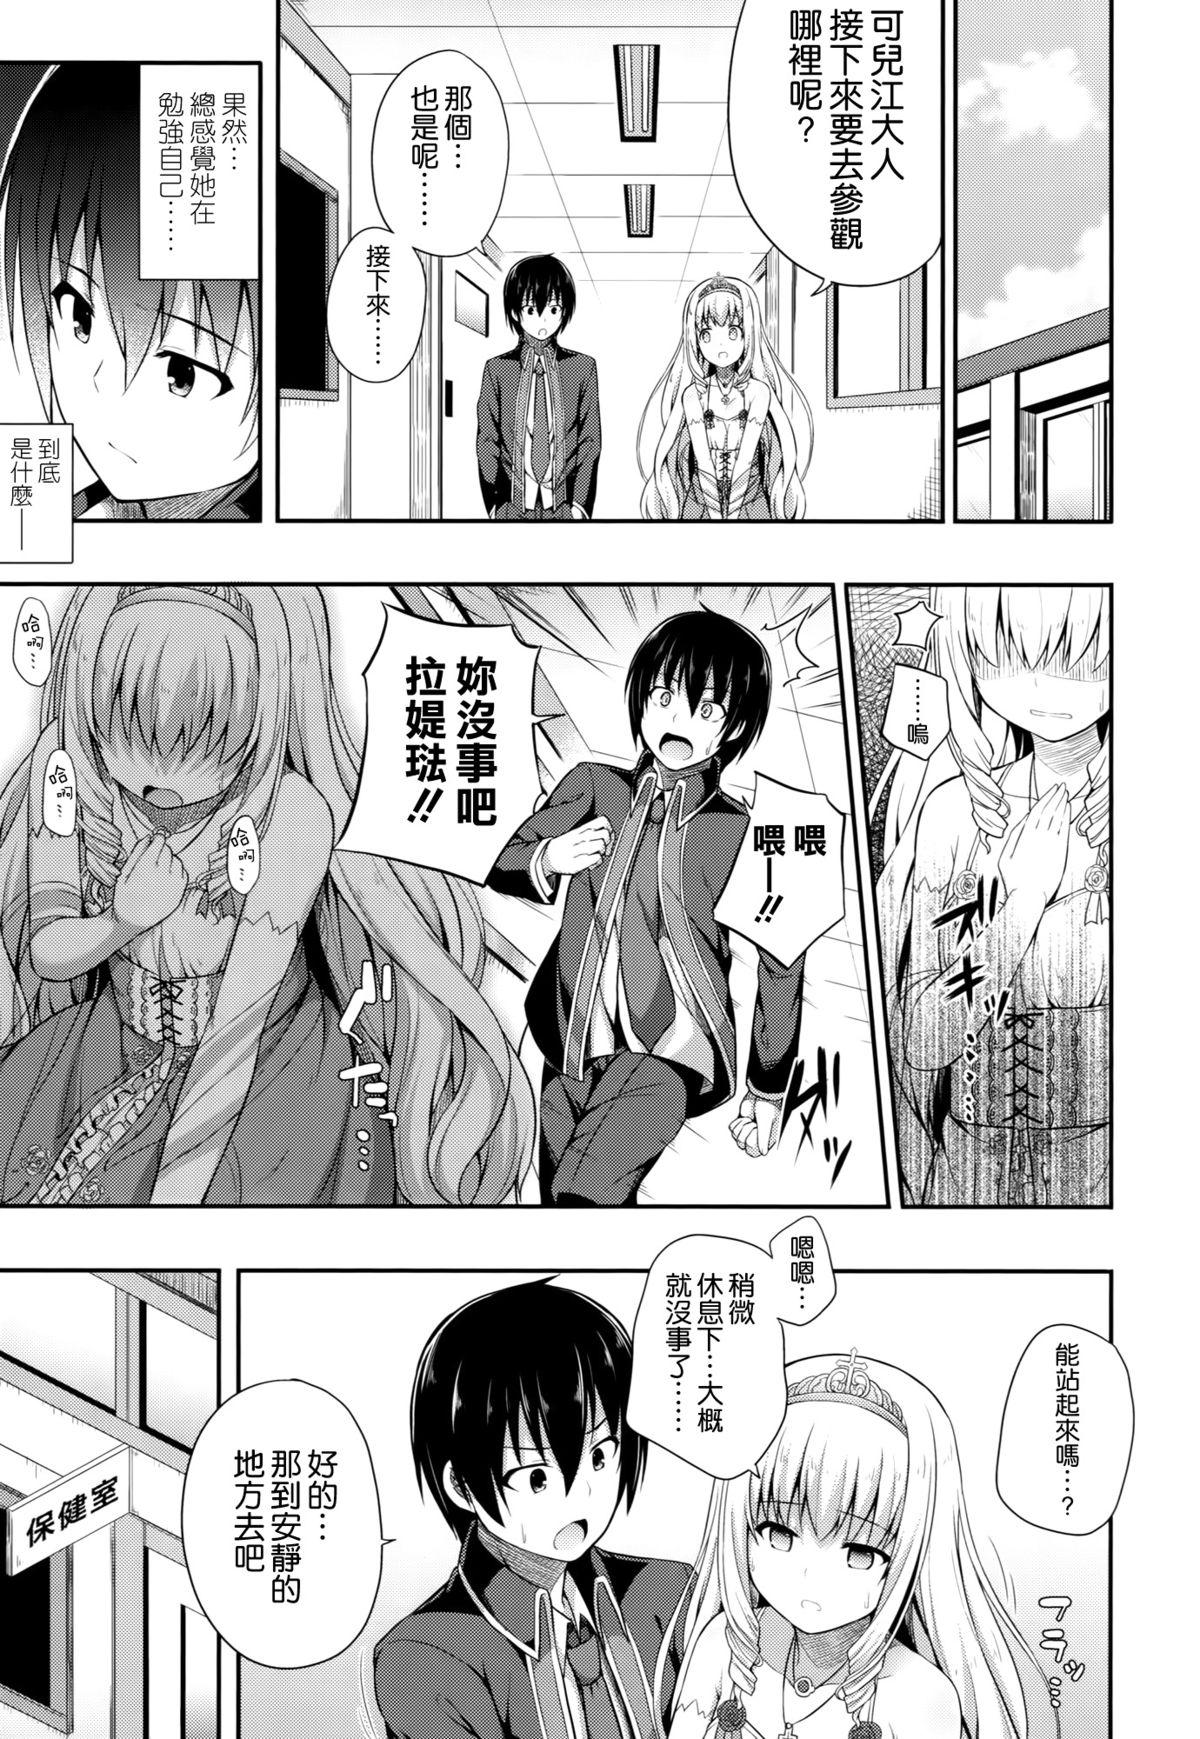 Buttfucking Brilliant Memories - Amagi brilliant park Gay Theresome - Page 11